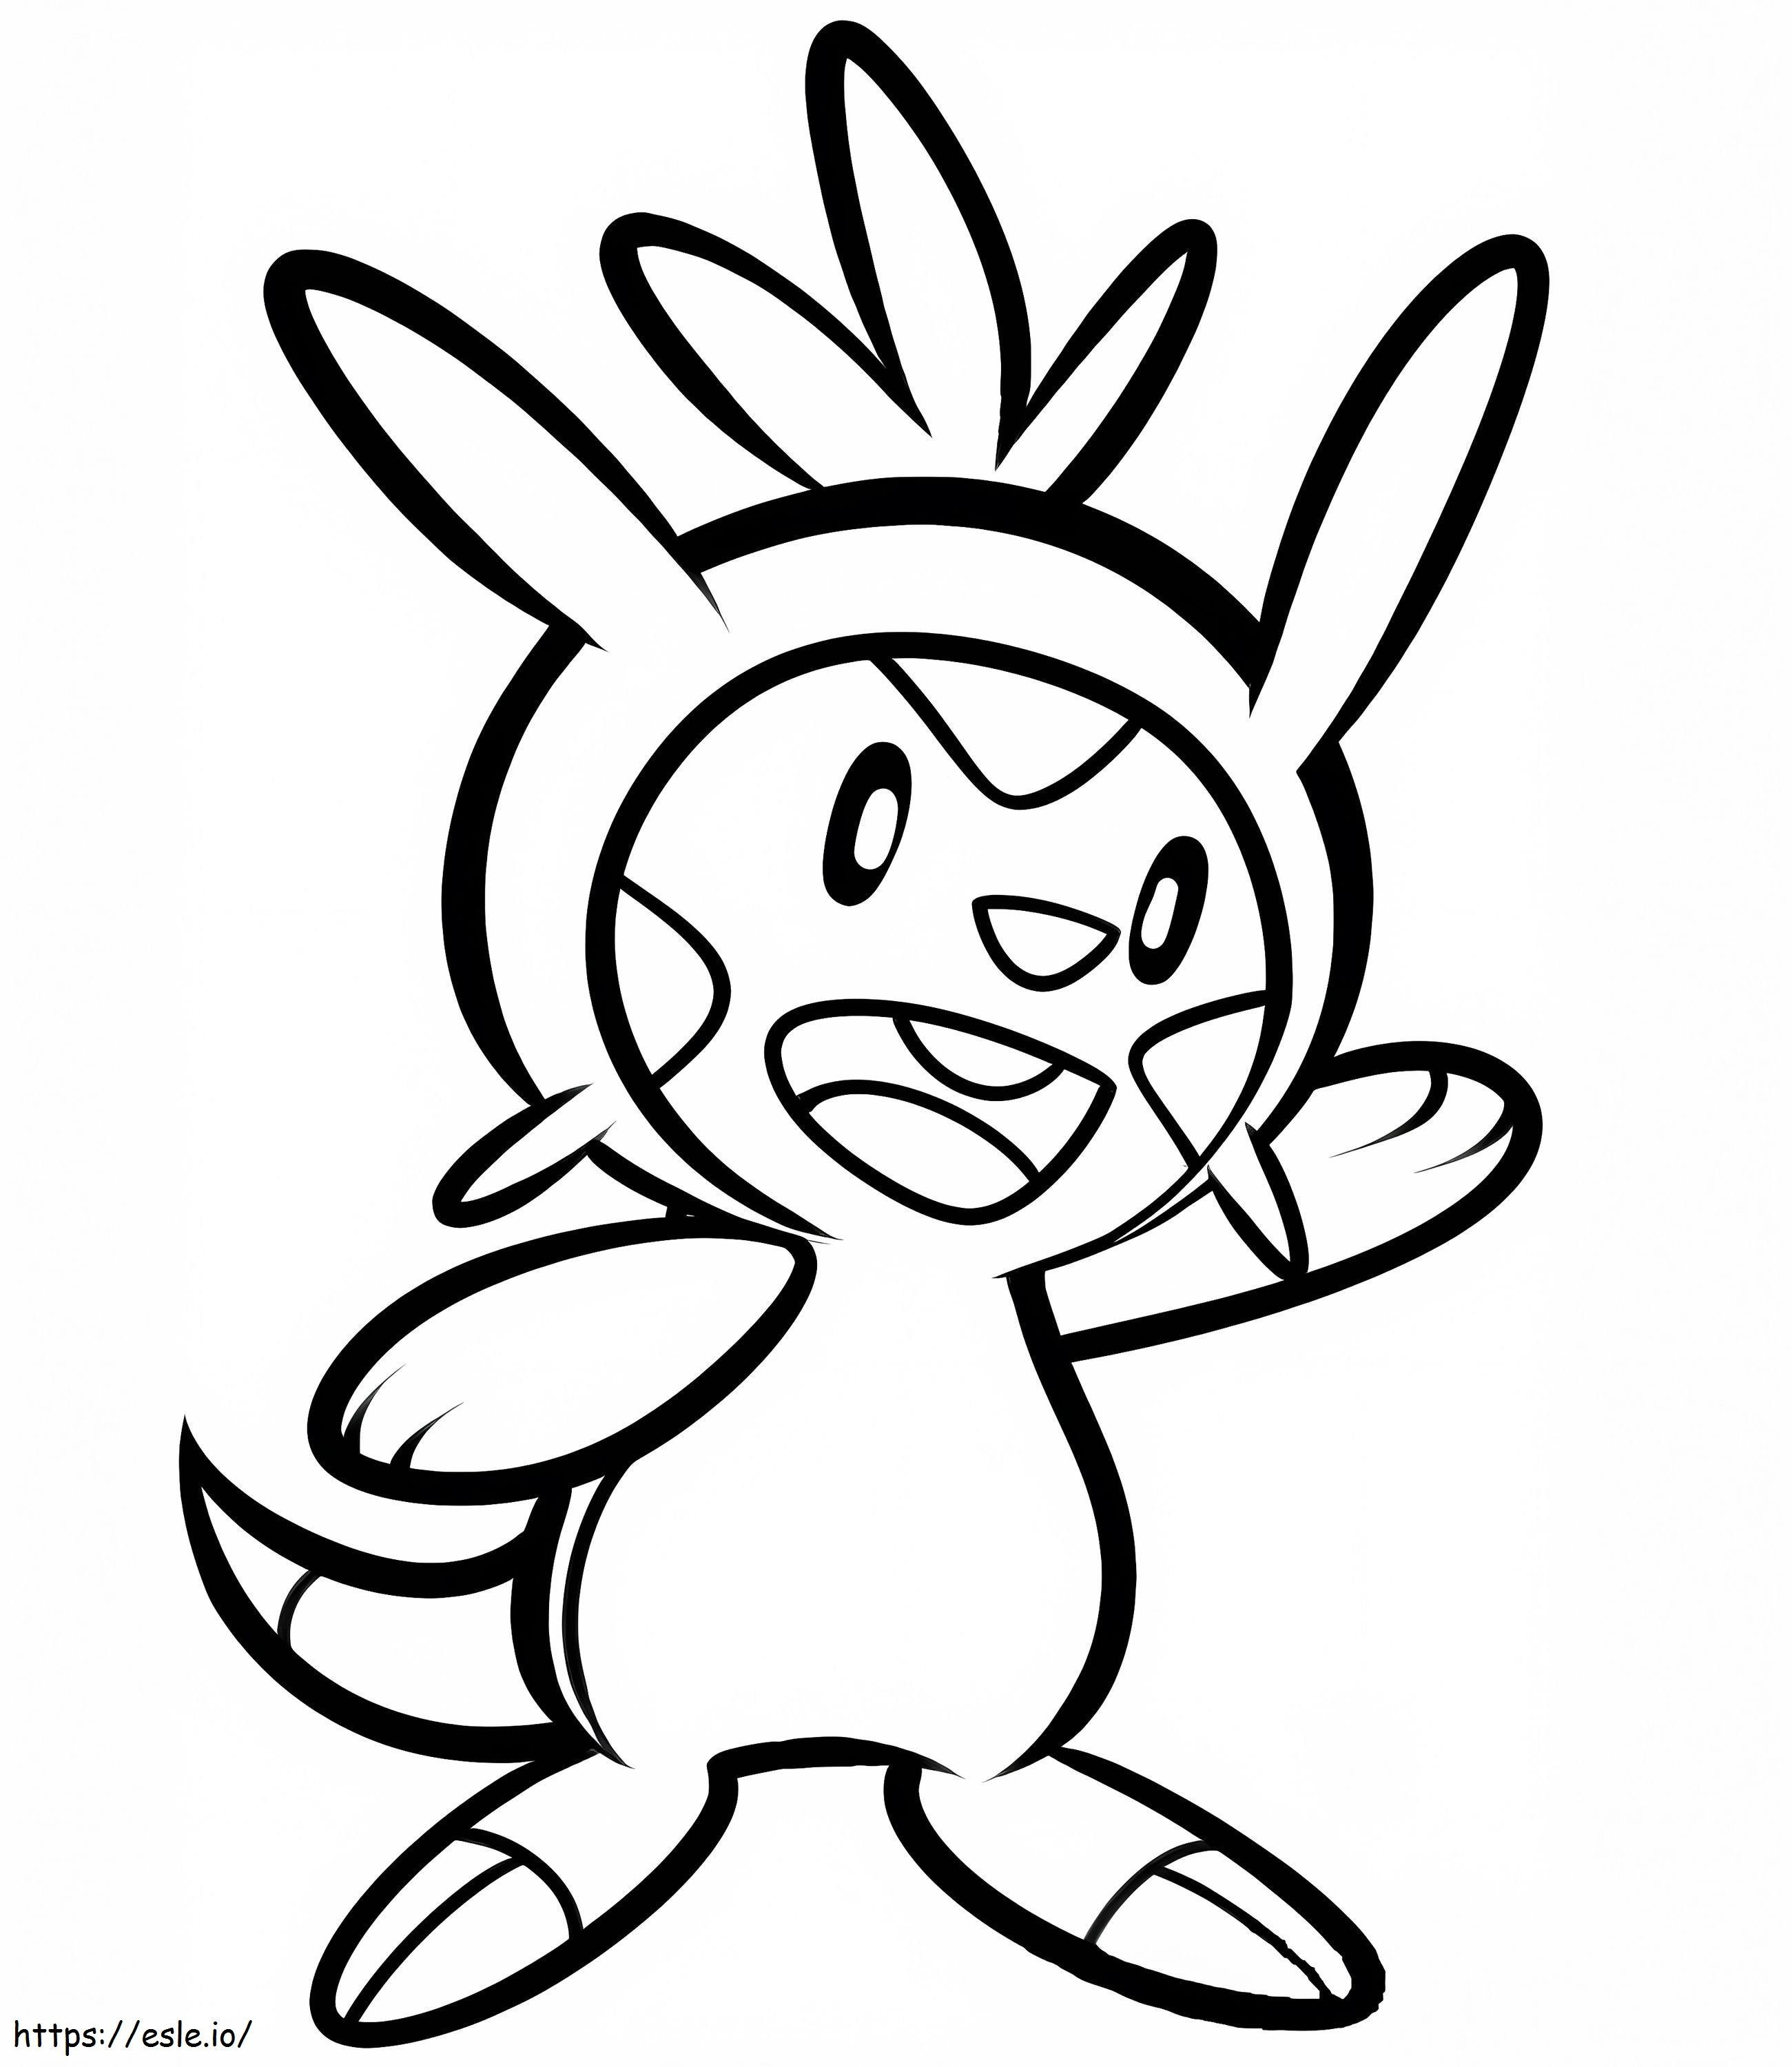 HQ Chespin Pokemon coloring page